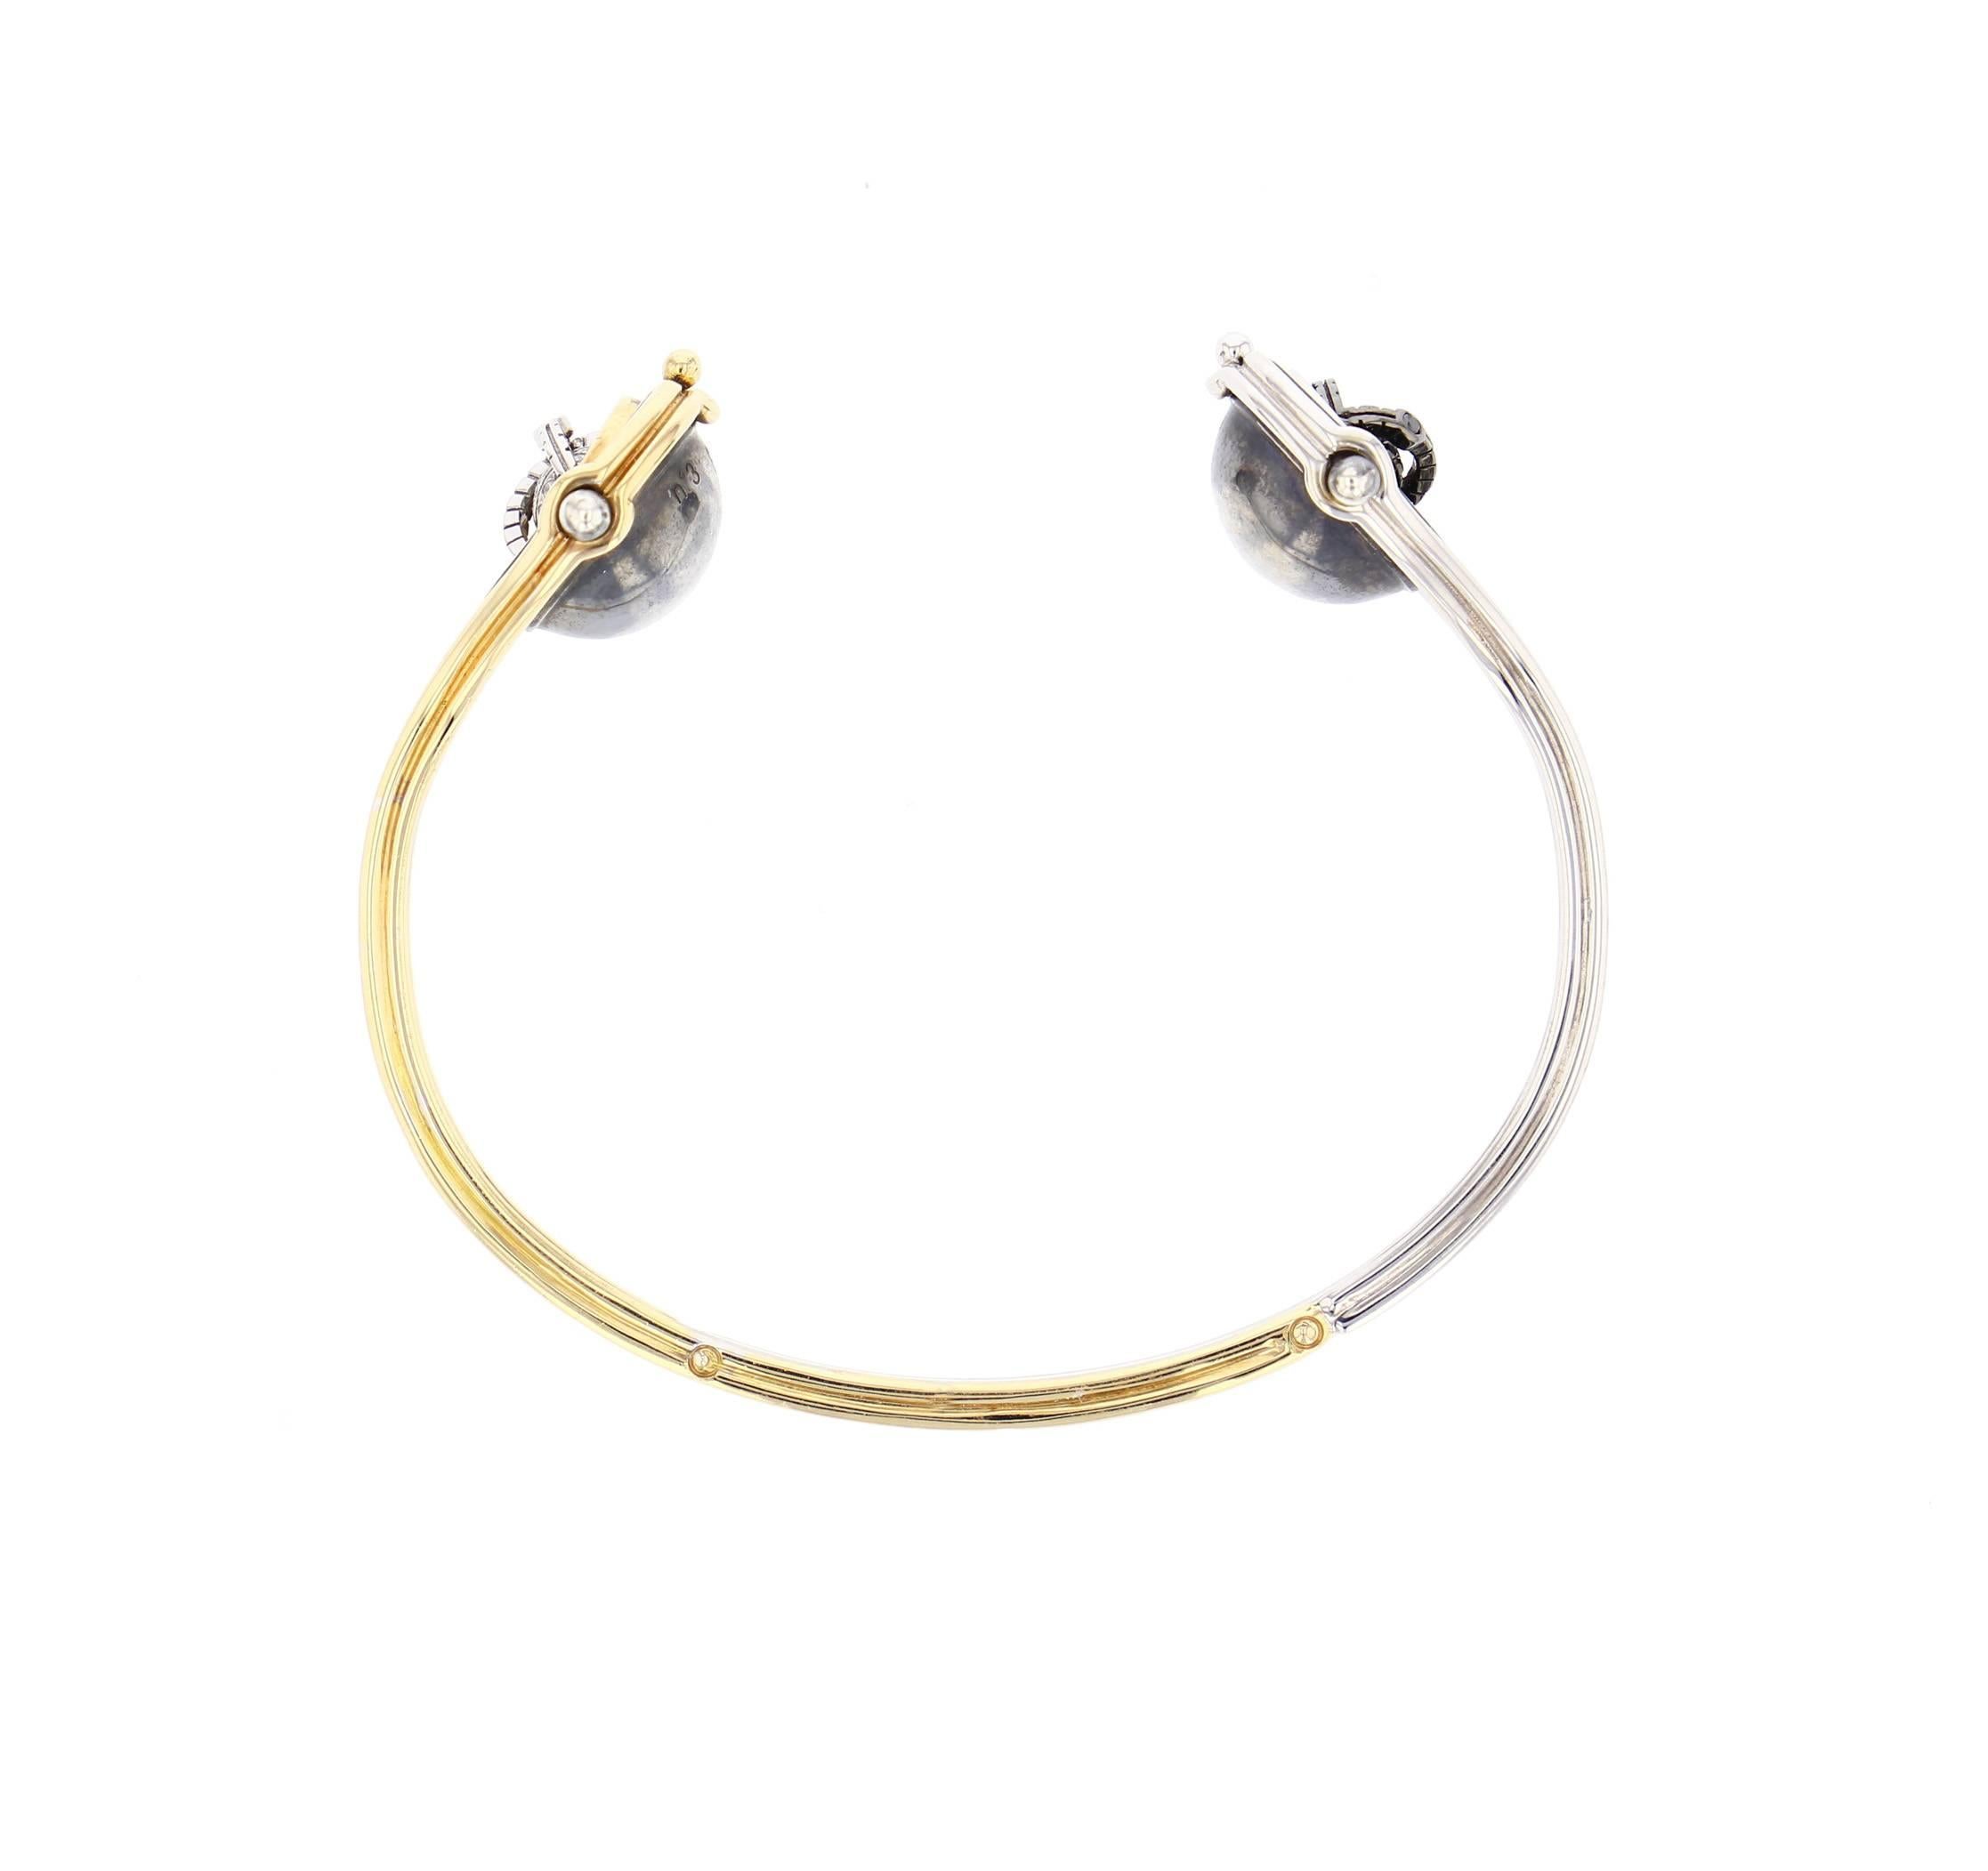 Toi et moi Bangle made of four bands of gold. On the "day" side, a yellow gold half globe rotating and opening on yellow gold sphere paved with white diamonds. On the "night" side, a white gold half globe rotating and opening on